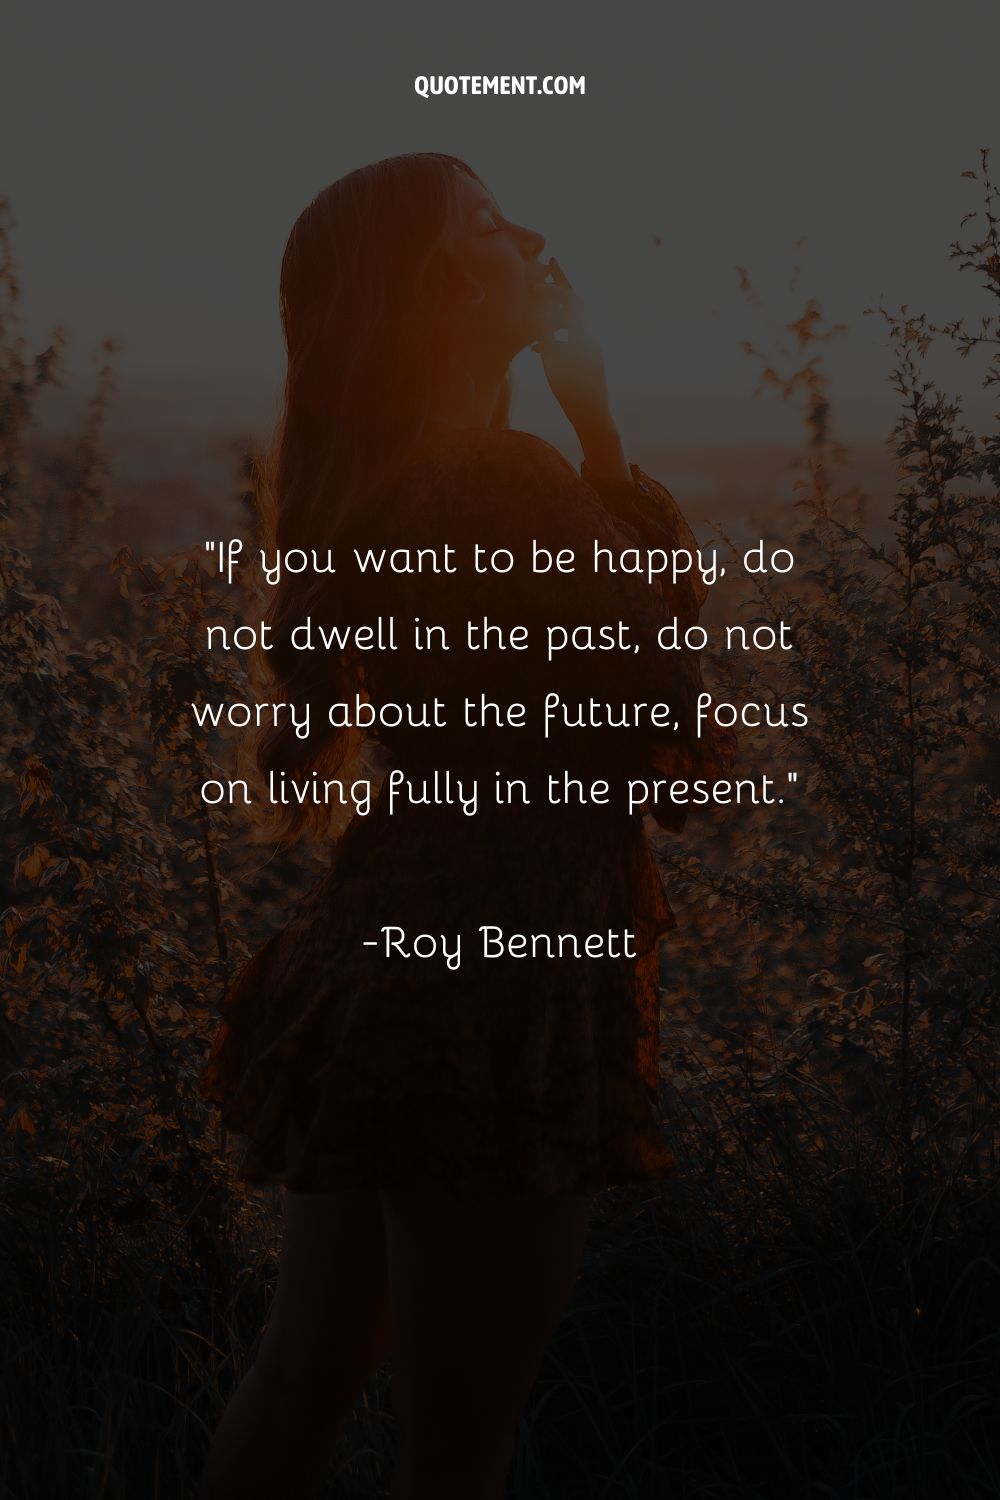 If you want to be happy, do not dwell in the past, do not worry about the future, focus on living fully in the present